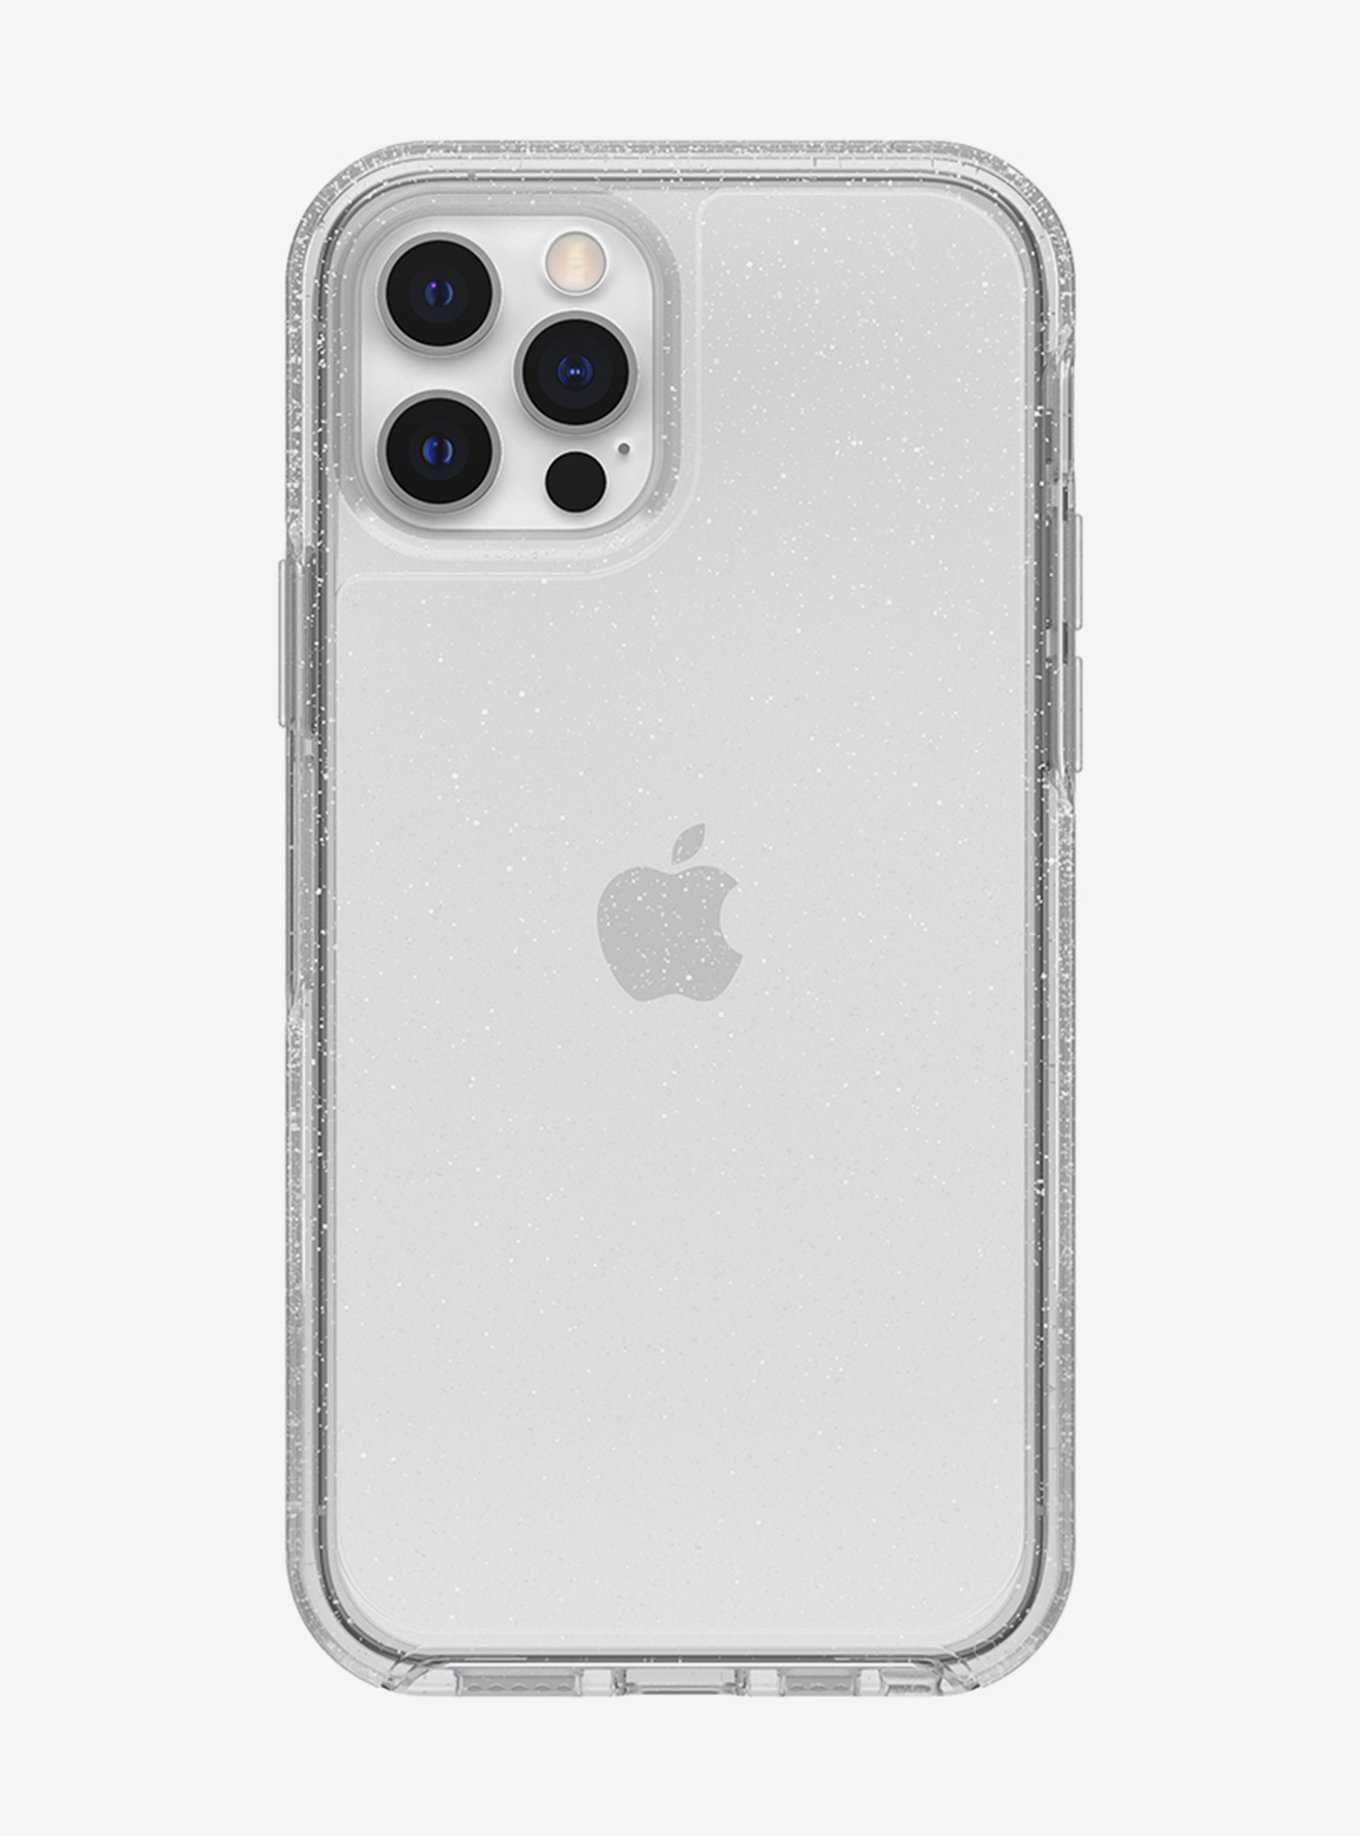 OtterBox iPhone 12 / iPhone 12 Pro Case Symmetry Series Stardust, , hi-res